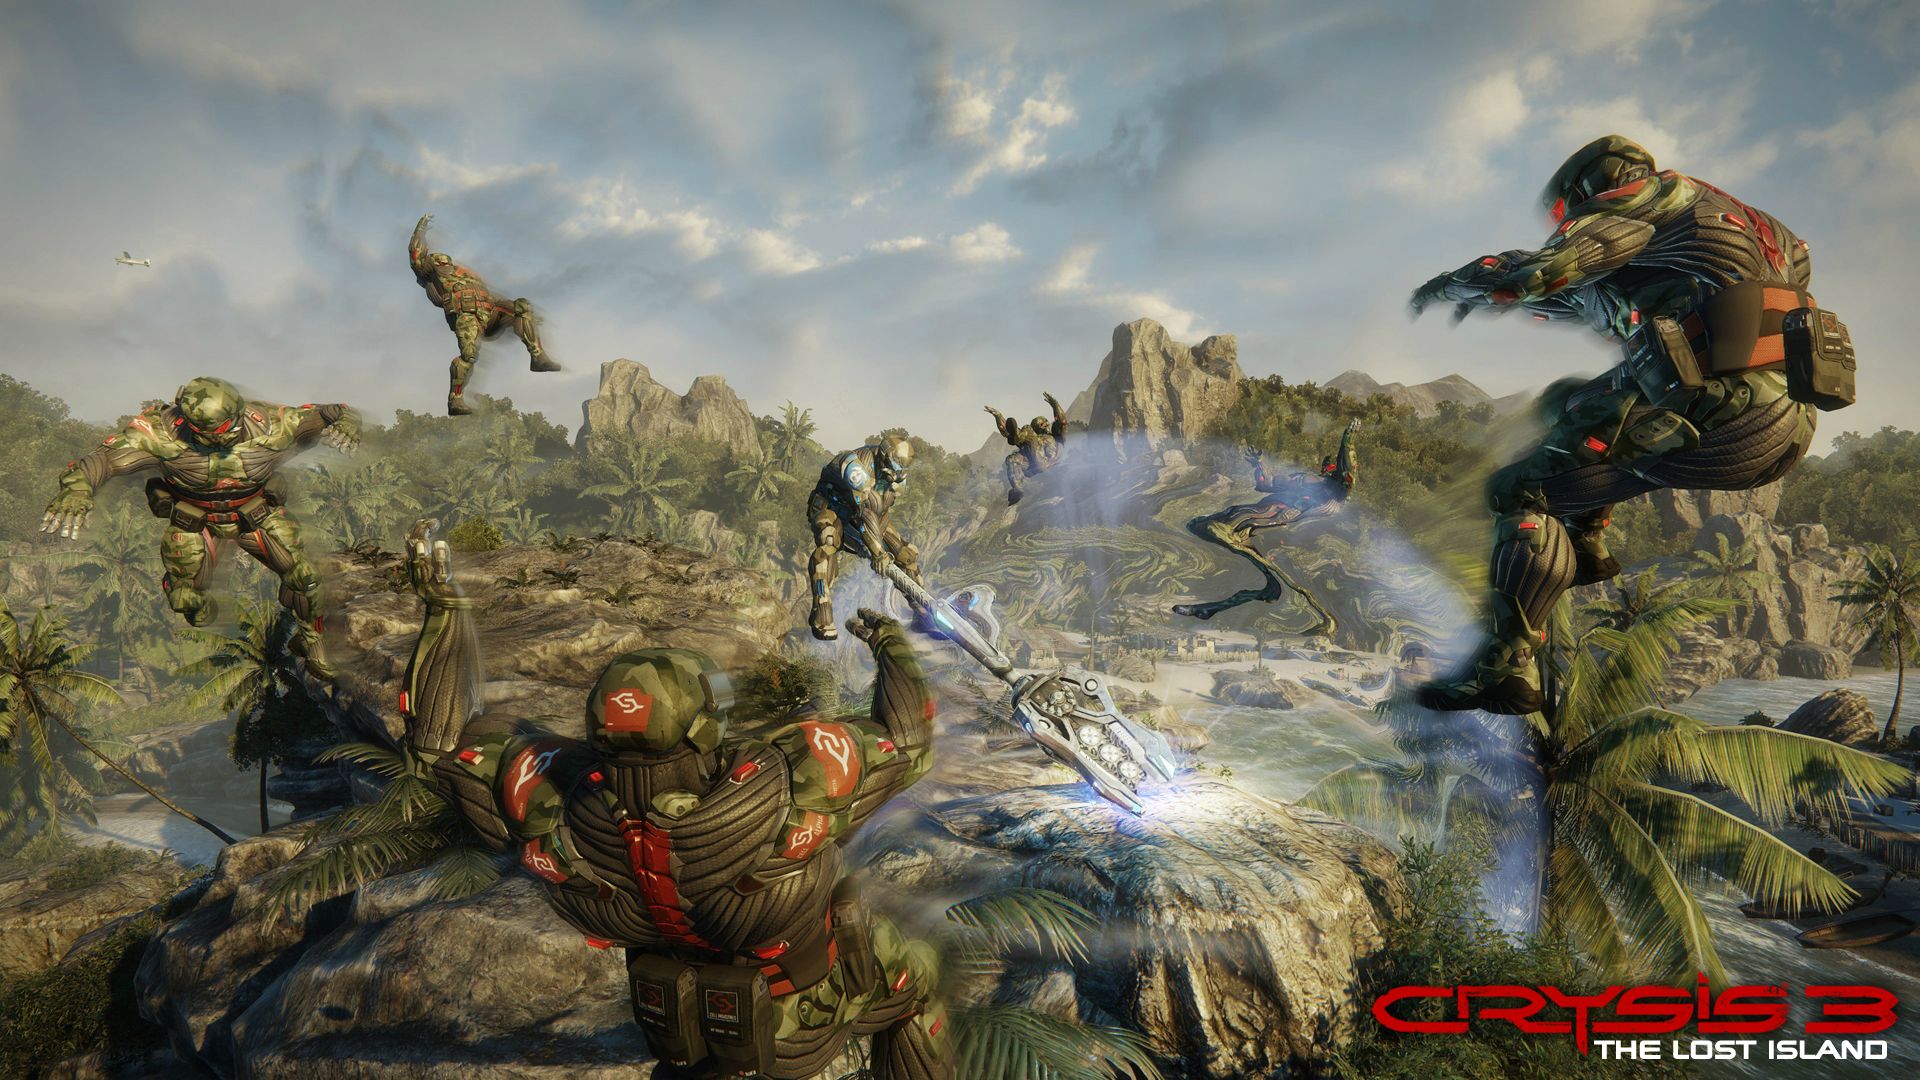 Media asset in full size related to 3dfxzone.it news item entitled as follows: Presentazione e screenshots del DLC Crysis 3: The Lost Island | Image Name: news19611_Crysis-3-The-Lost-Island_2.jpg